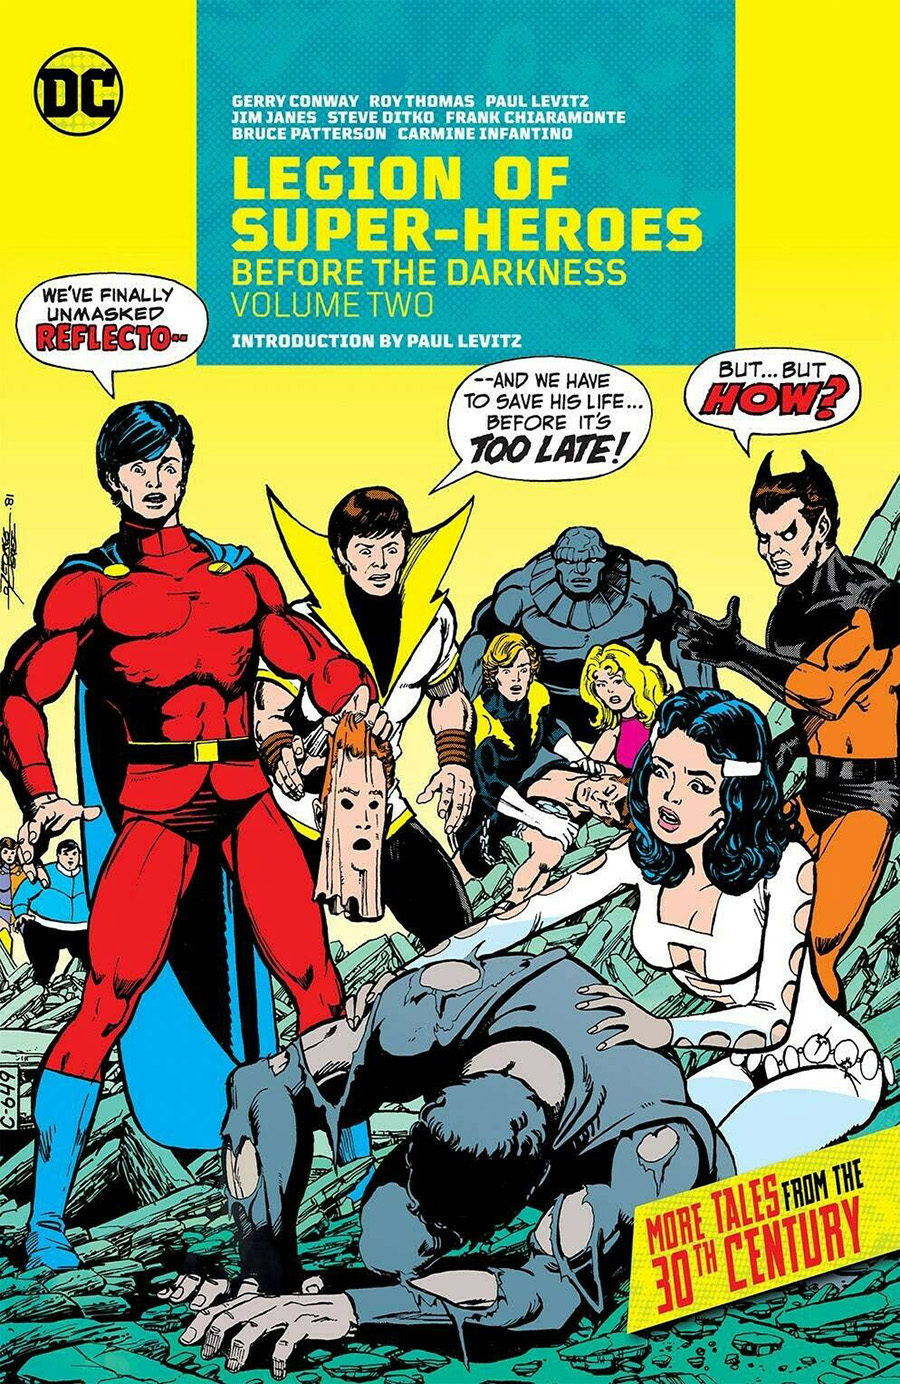 Legion Of Super-Heroes Before The Darkness Vol 2 HC